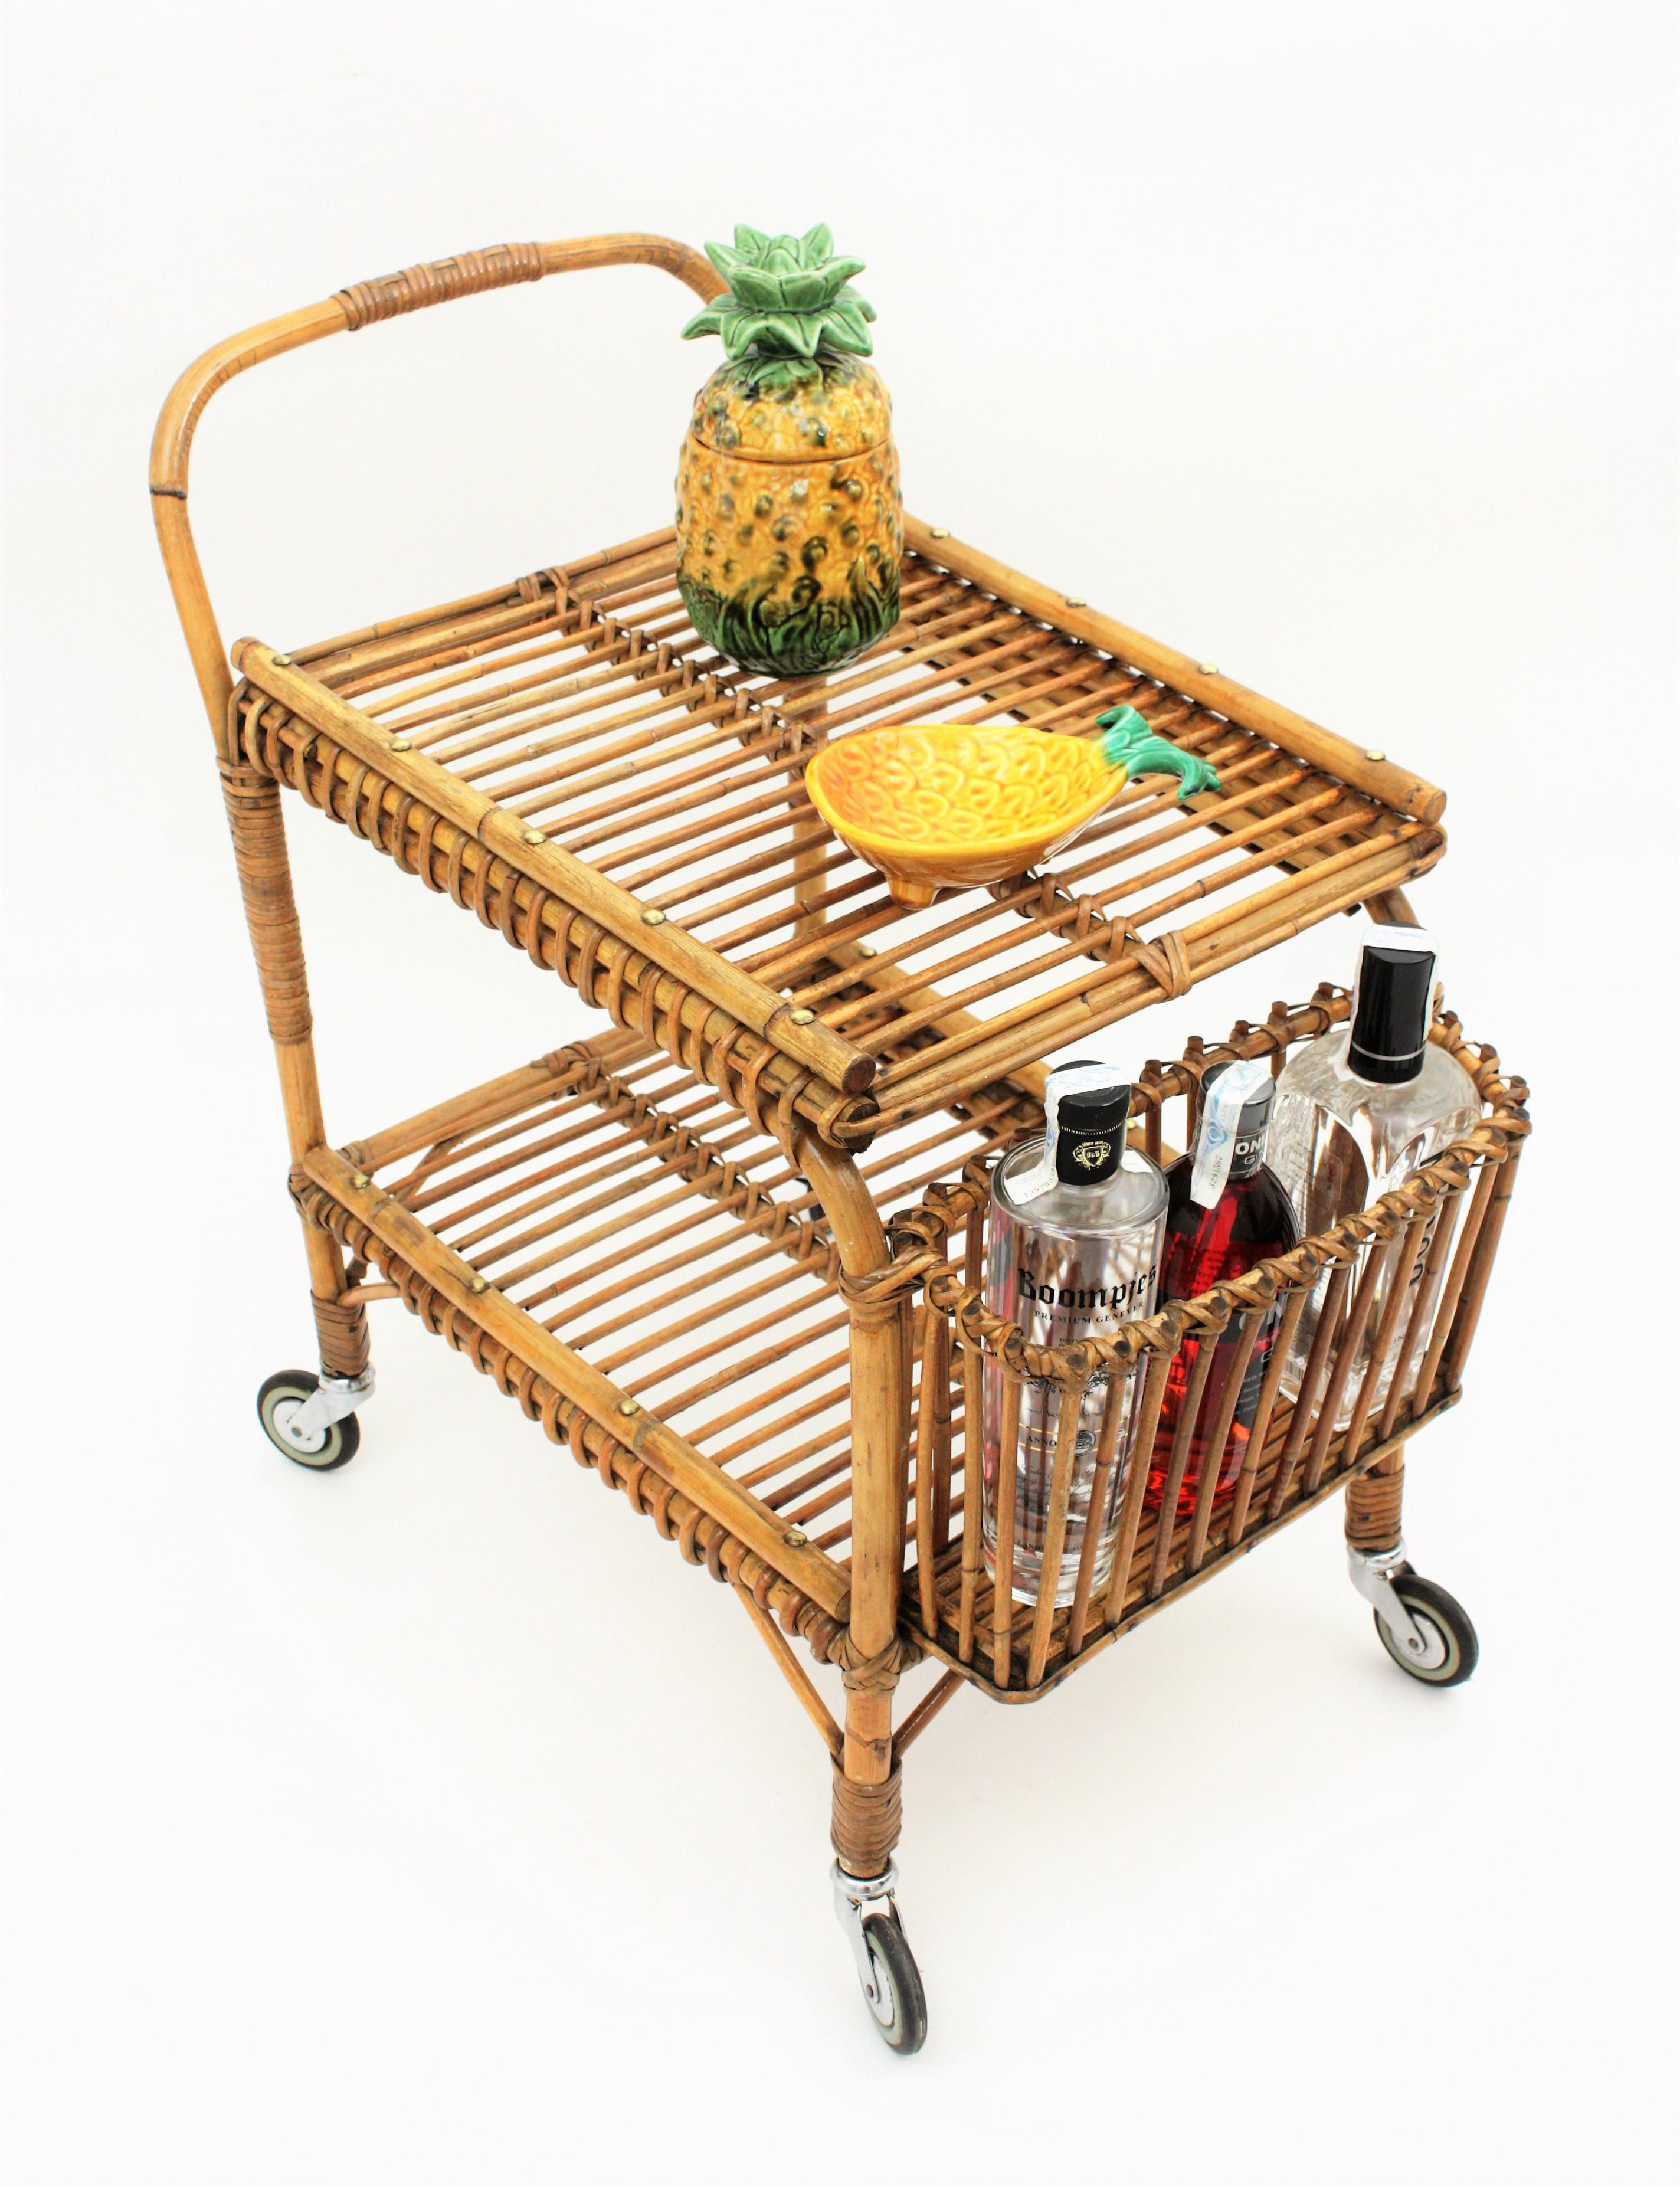 Eye-catching Italian modernist rattan and bamboo bar cart or serving trolley, Italy, 1950s
A cool bamboo and rattan serving trolley or bar cart with reminiscences of Franco Albini and Bonacina designs.
The perfect accent as cocktails or drinks